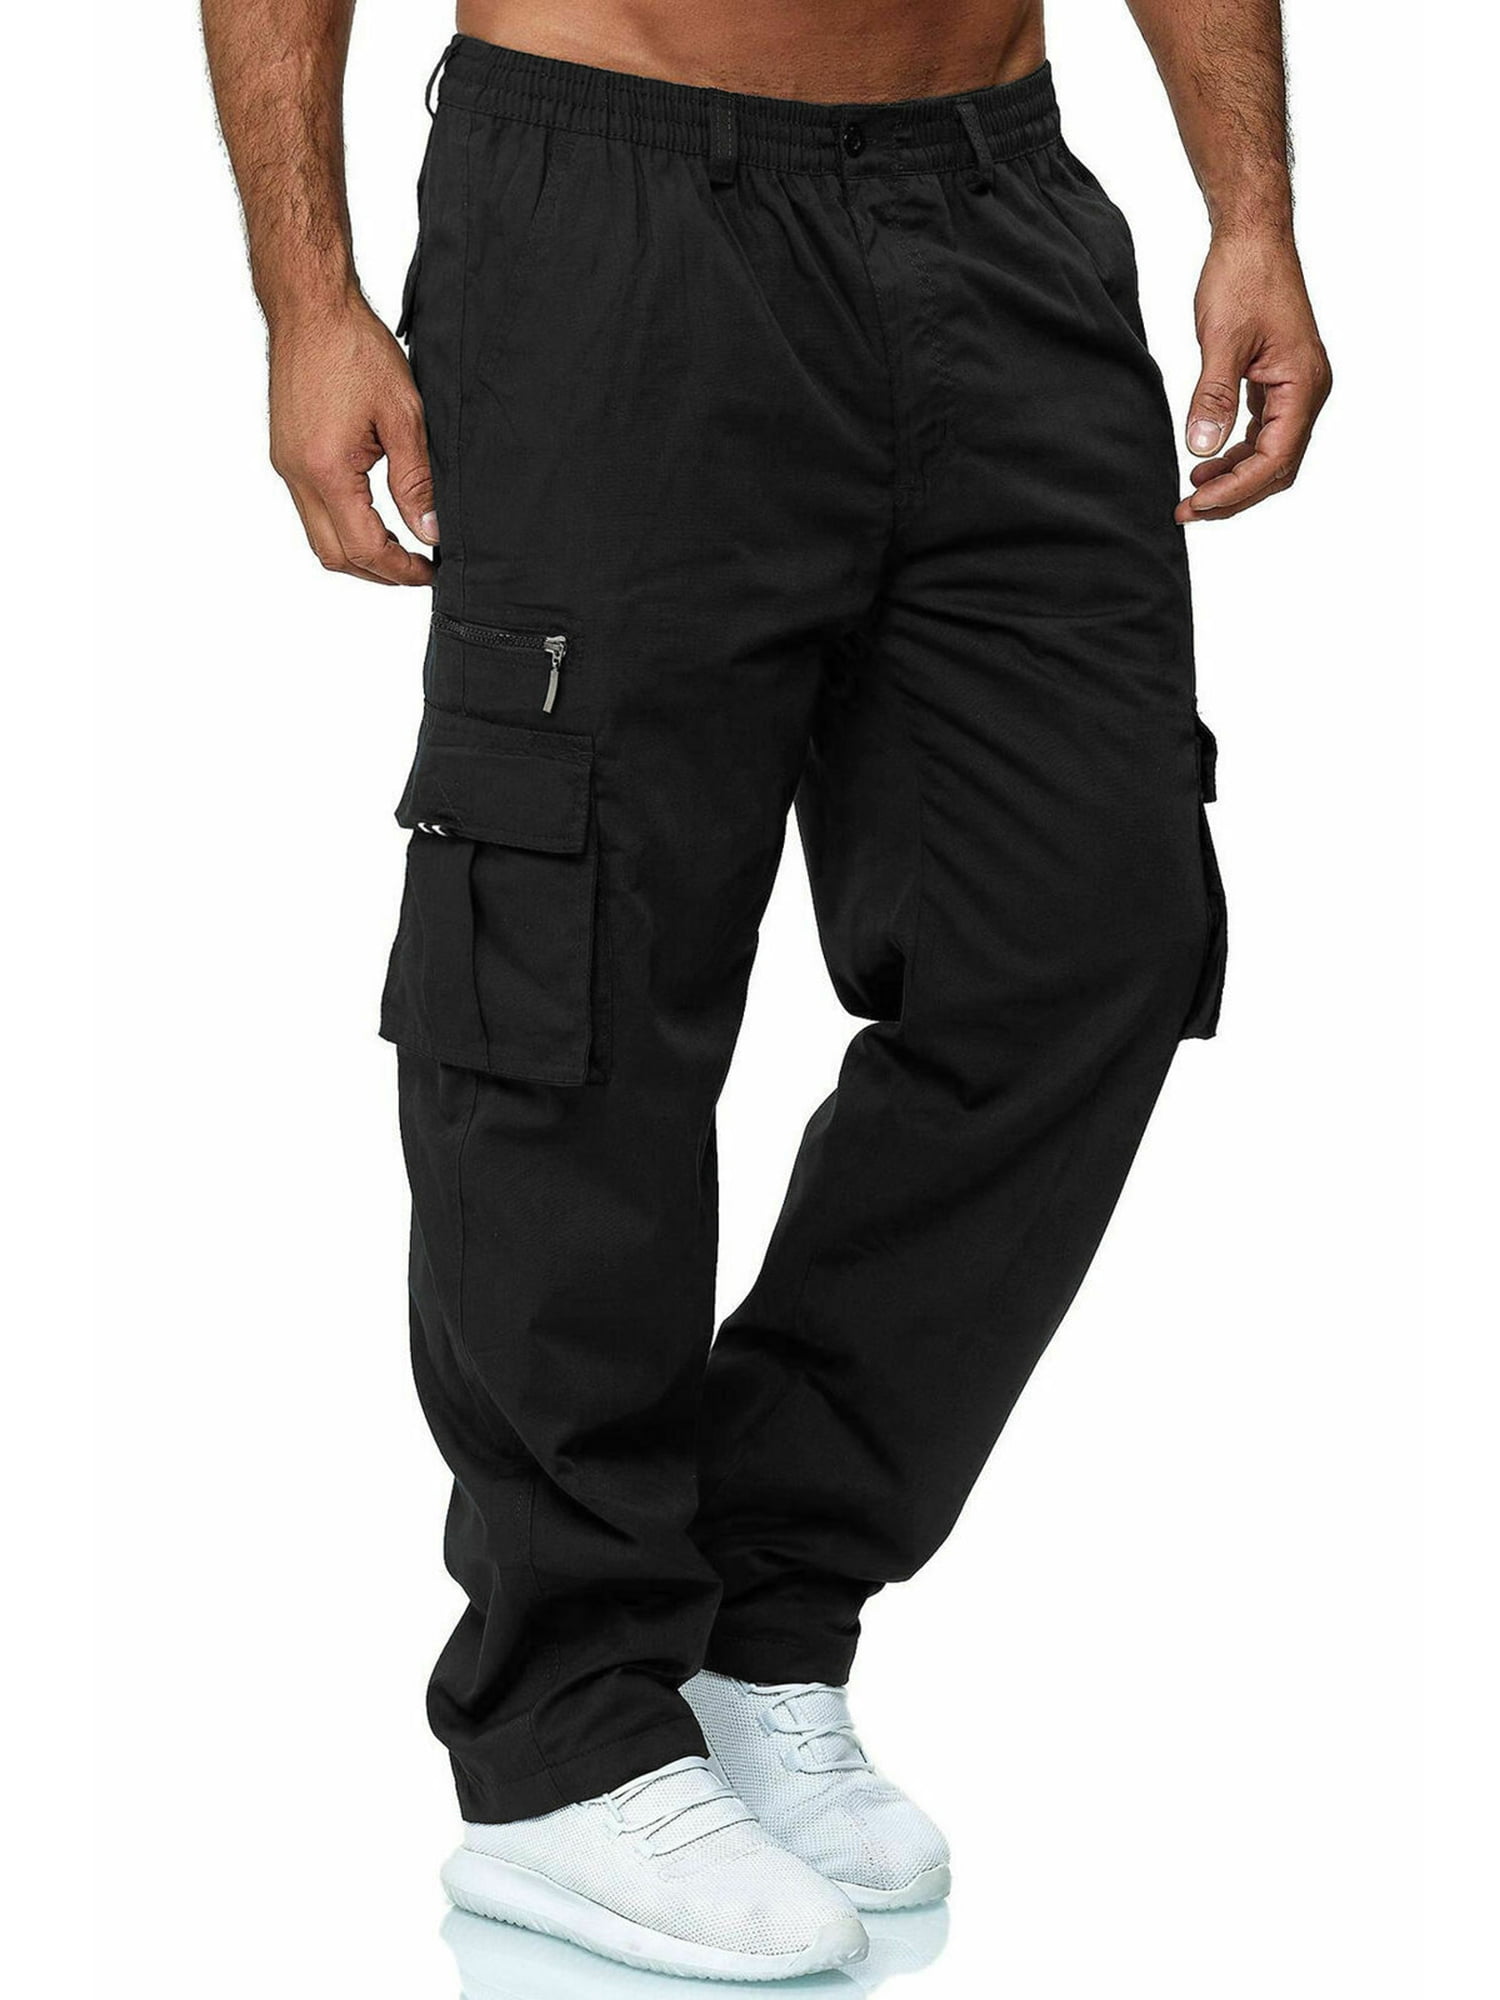 New Mens 3 In 1 Trousers Zip Off Combat Cargo Pockets Summer Elasticated Waist Bottoms Shorts Polyester Pants M-3XL 